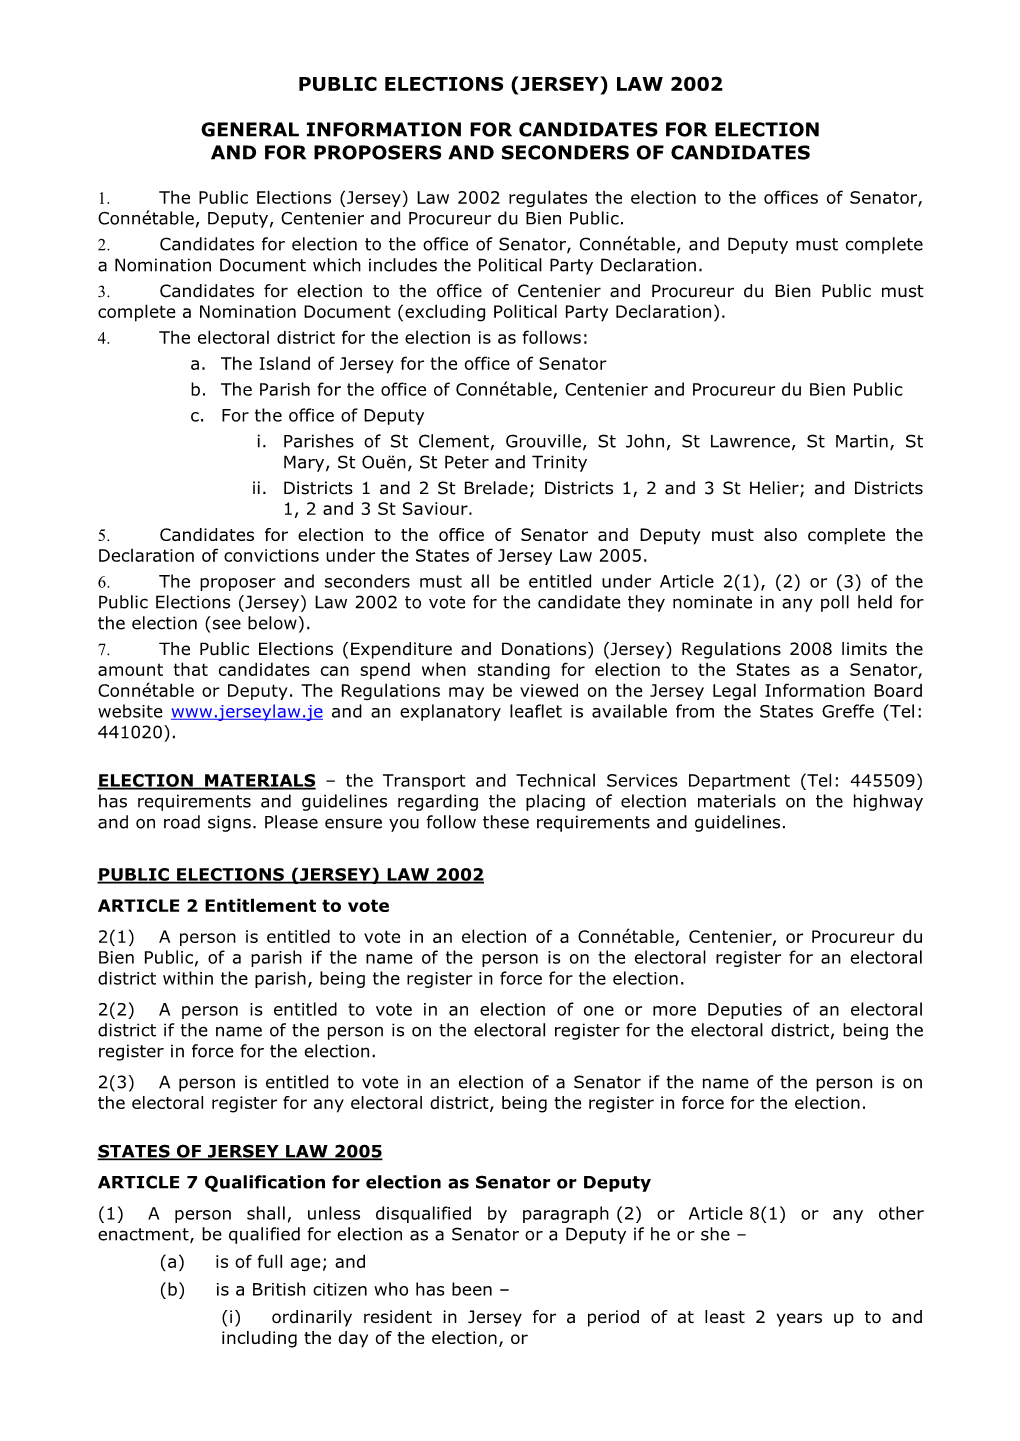 Public Elections (Jersey) Law 2002 General Information for Candidates